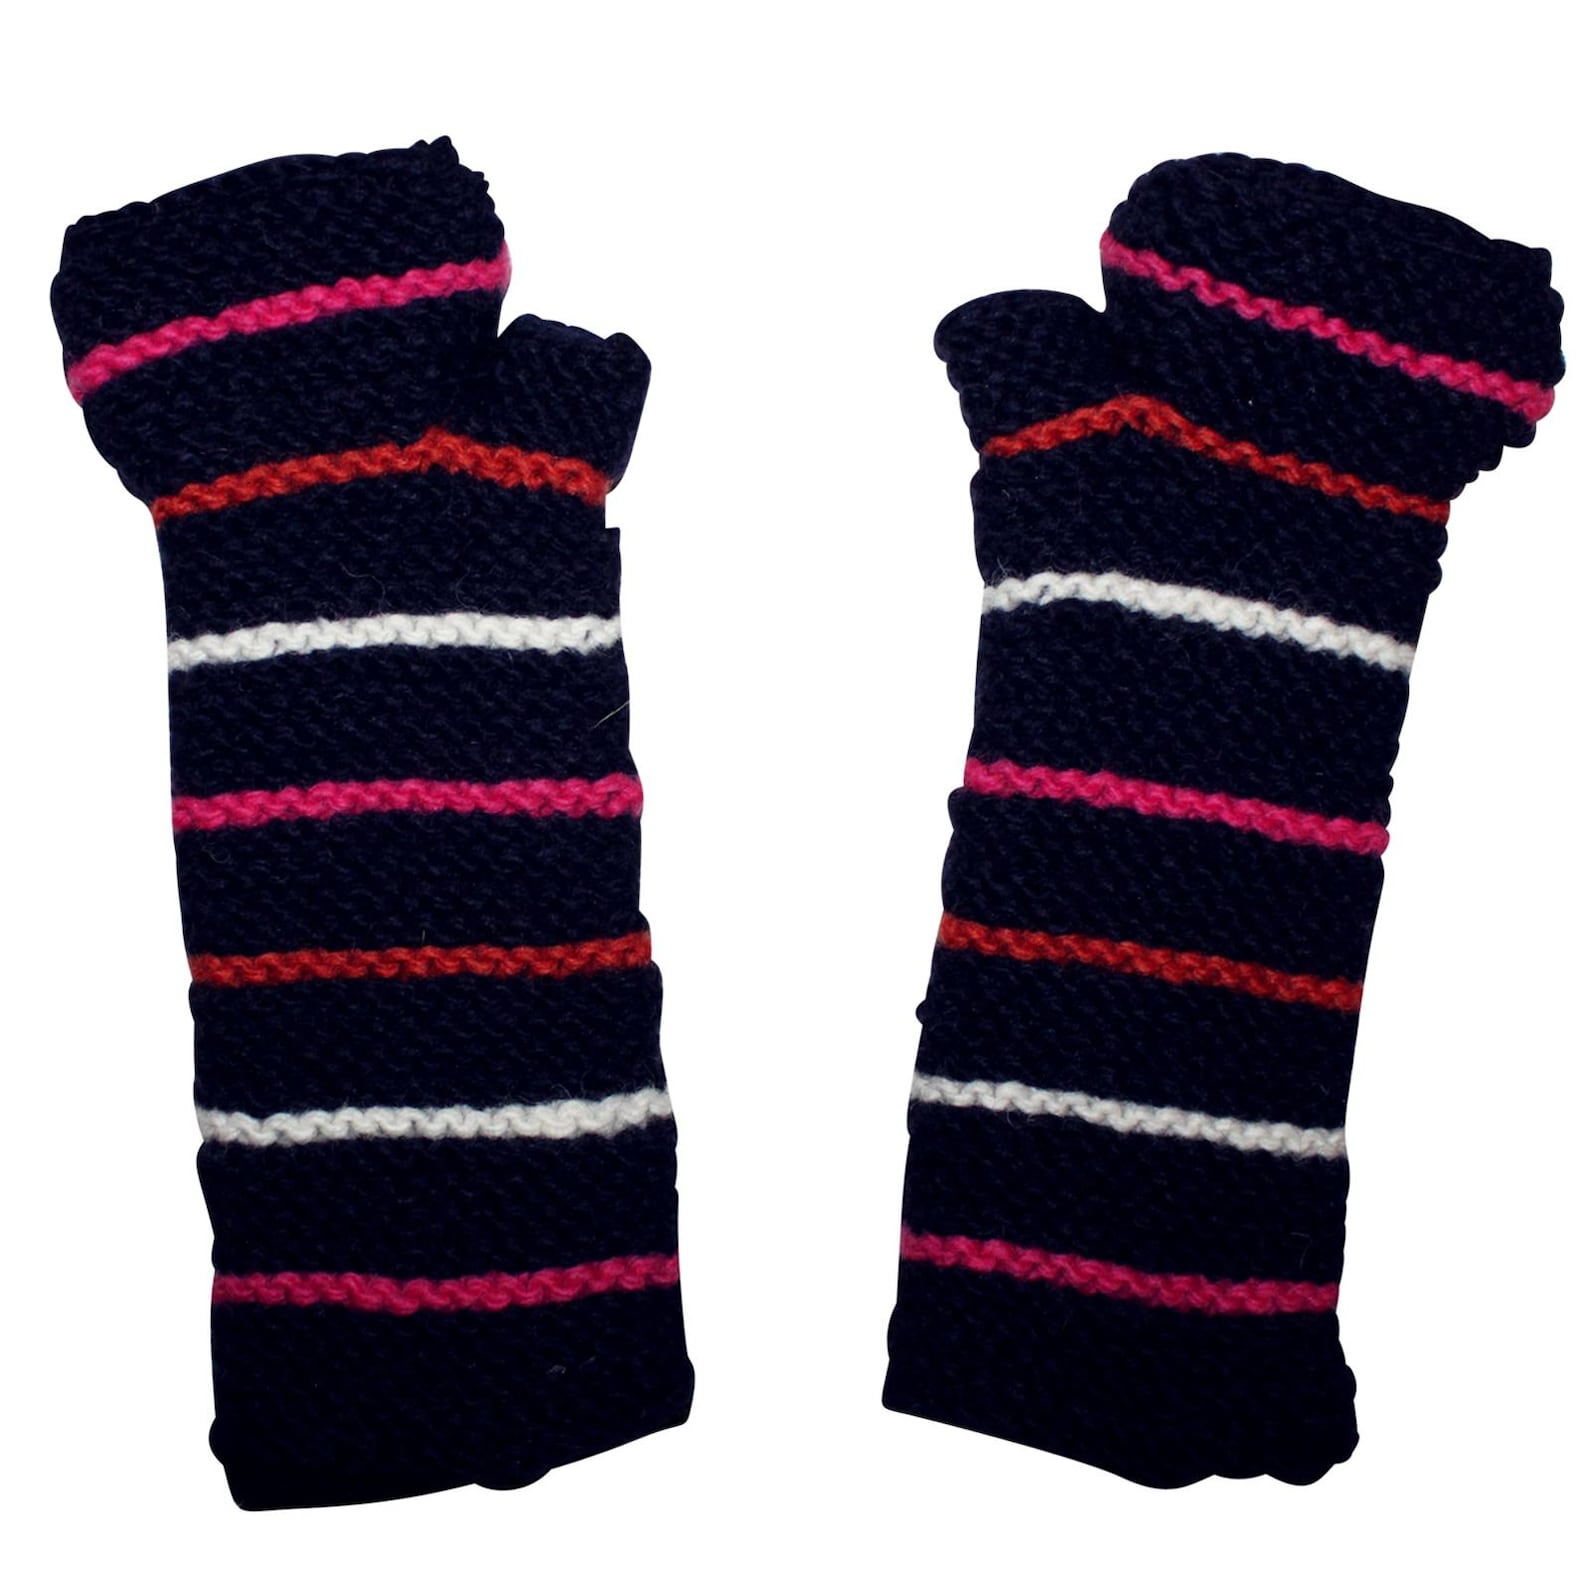 Arm Warmers Made of Wool Knitted Cuffs Blue-navy With Stripes Wrist ...